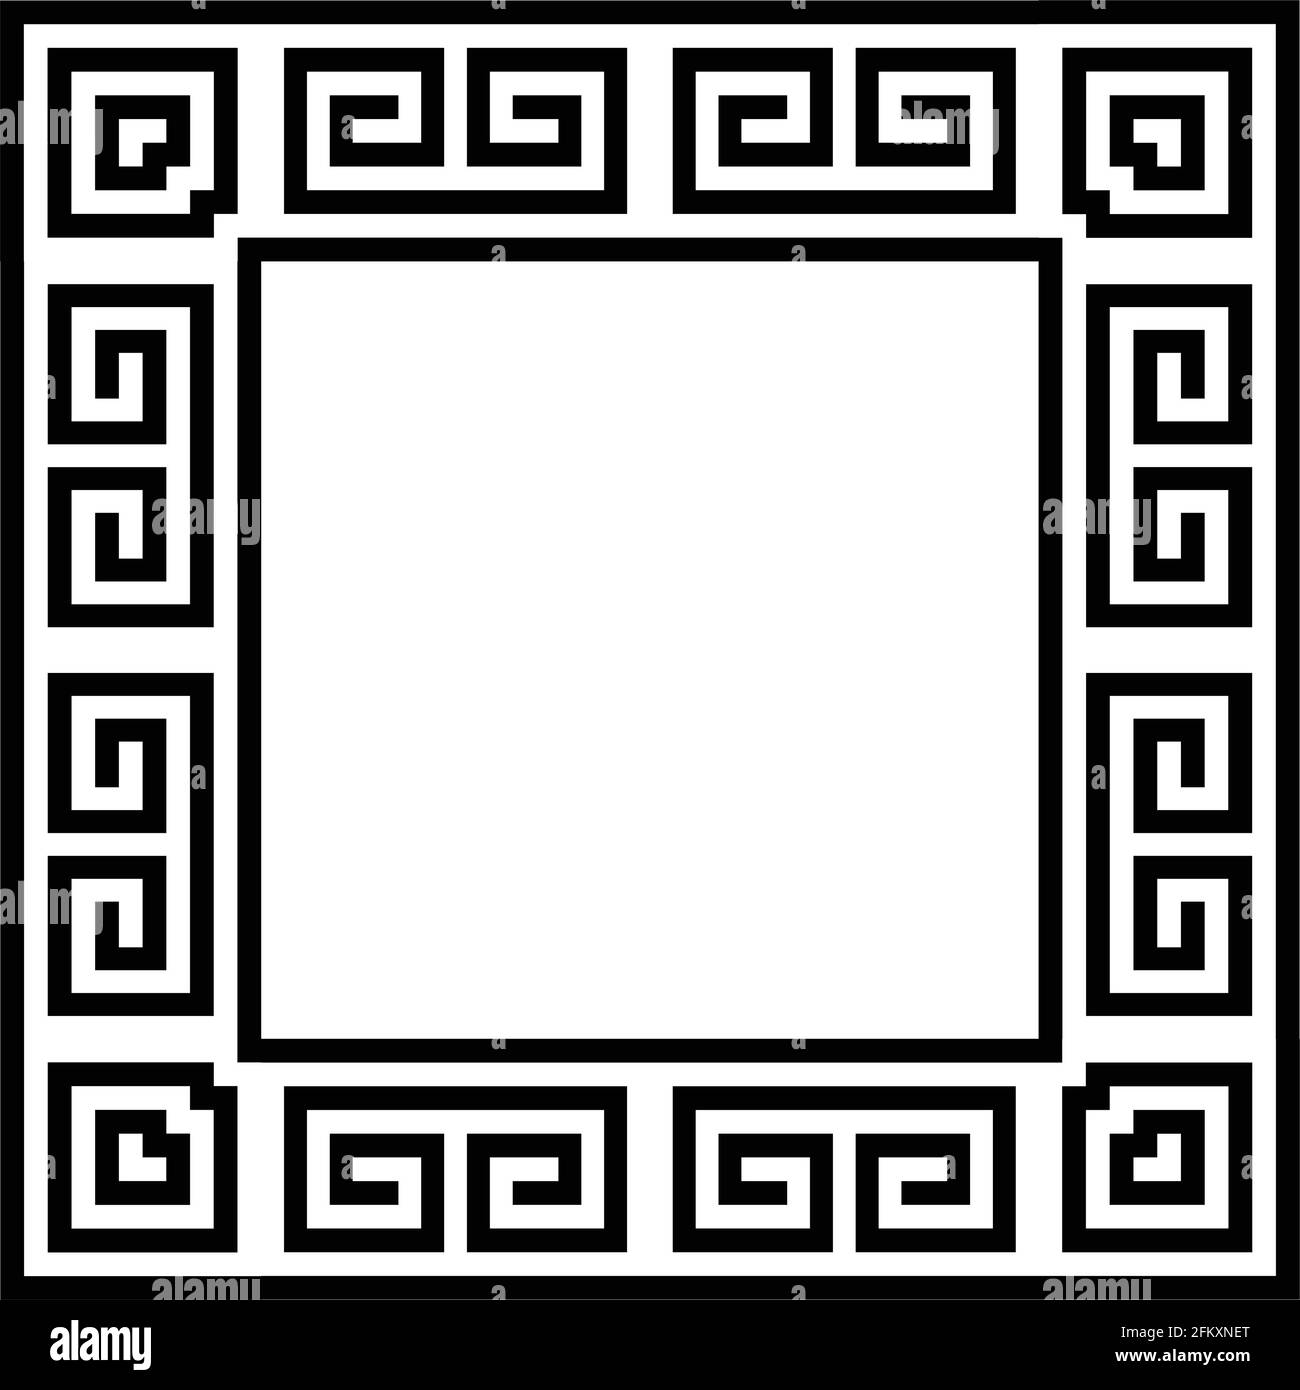 Versace pattern Black and White Stock Photos & Images - Alamy